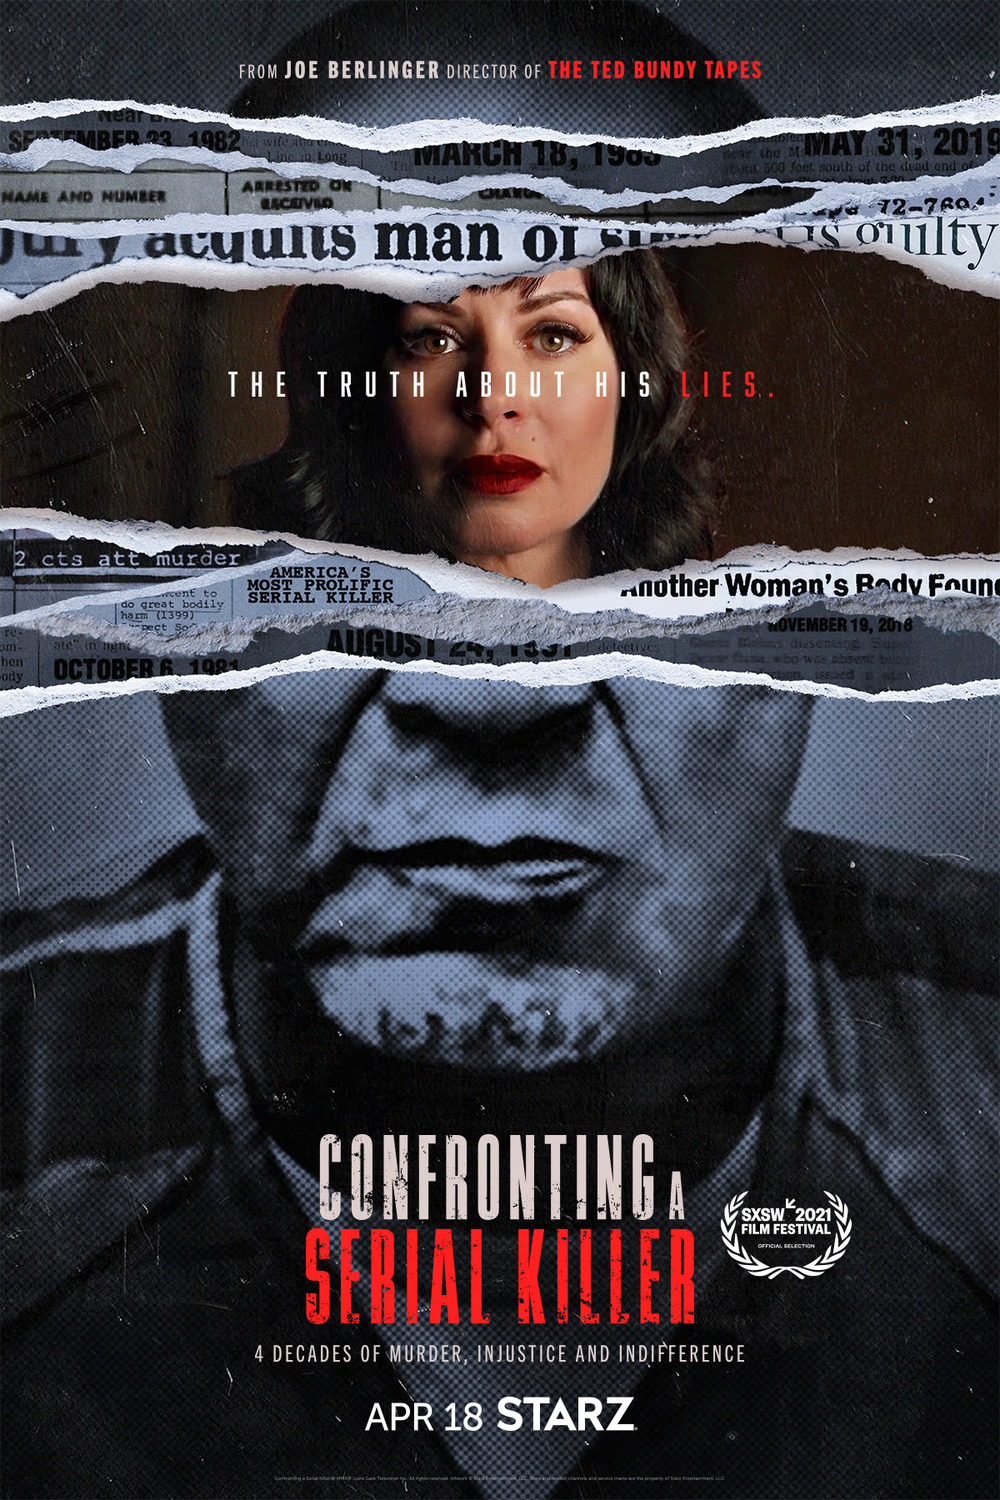 Extra Large TV Poster Image for Confronting A Serial Killer 